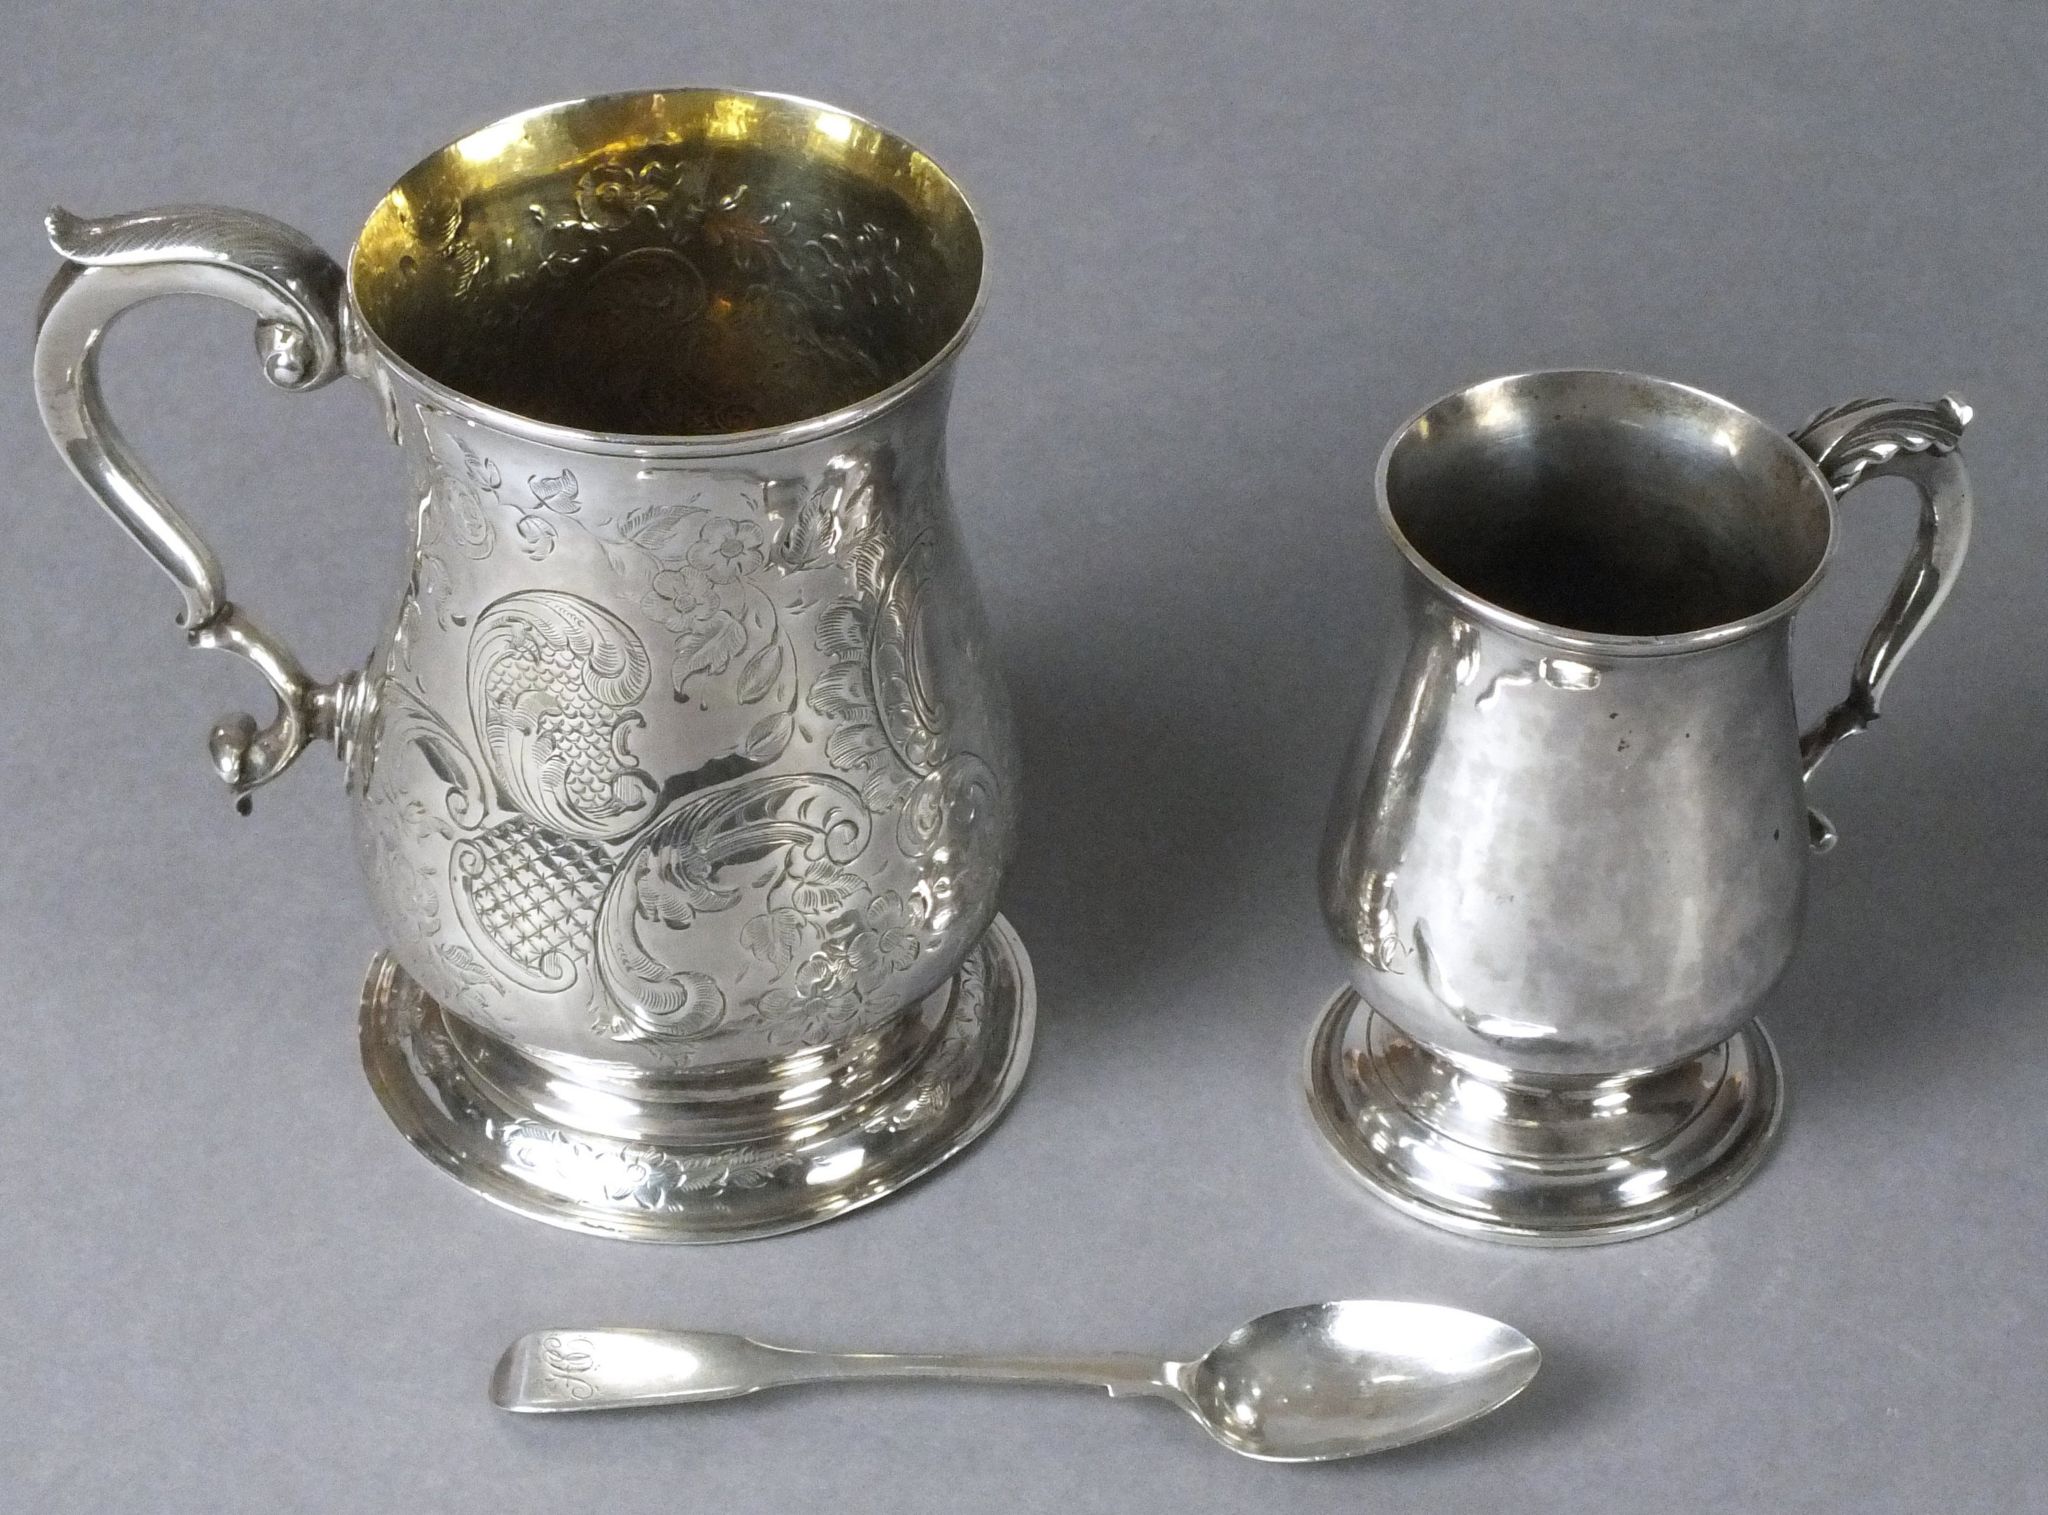 Cup awarded to Henry Cuttance by the King of Norway